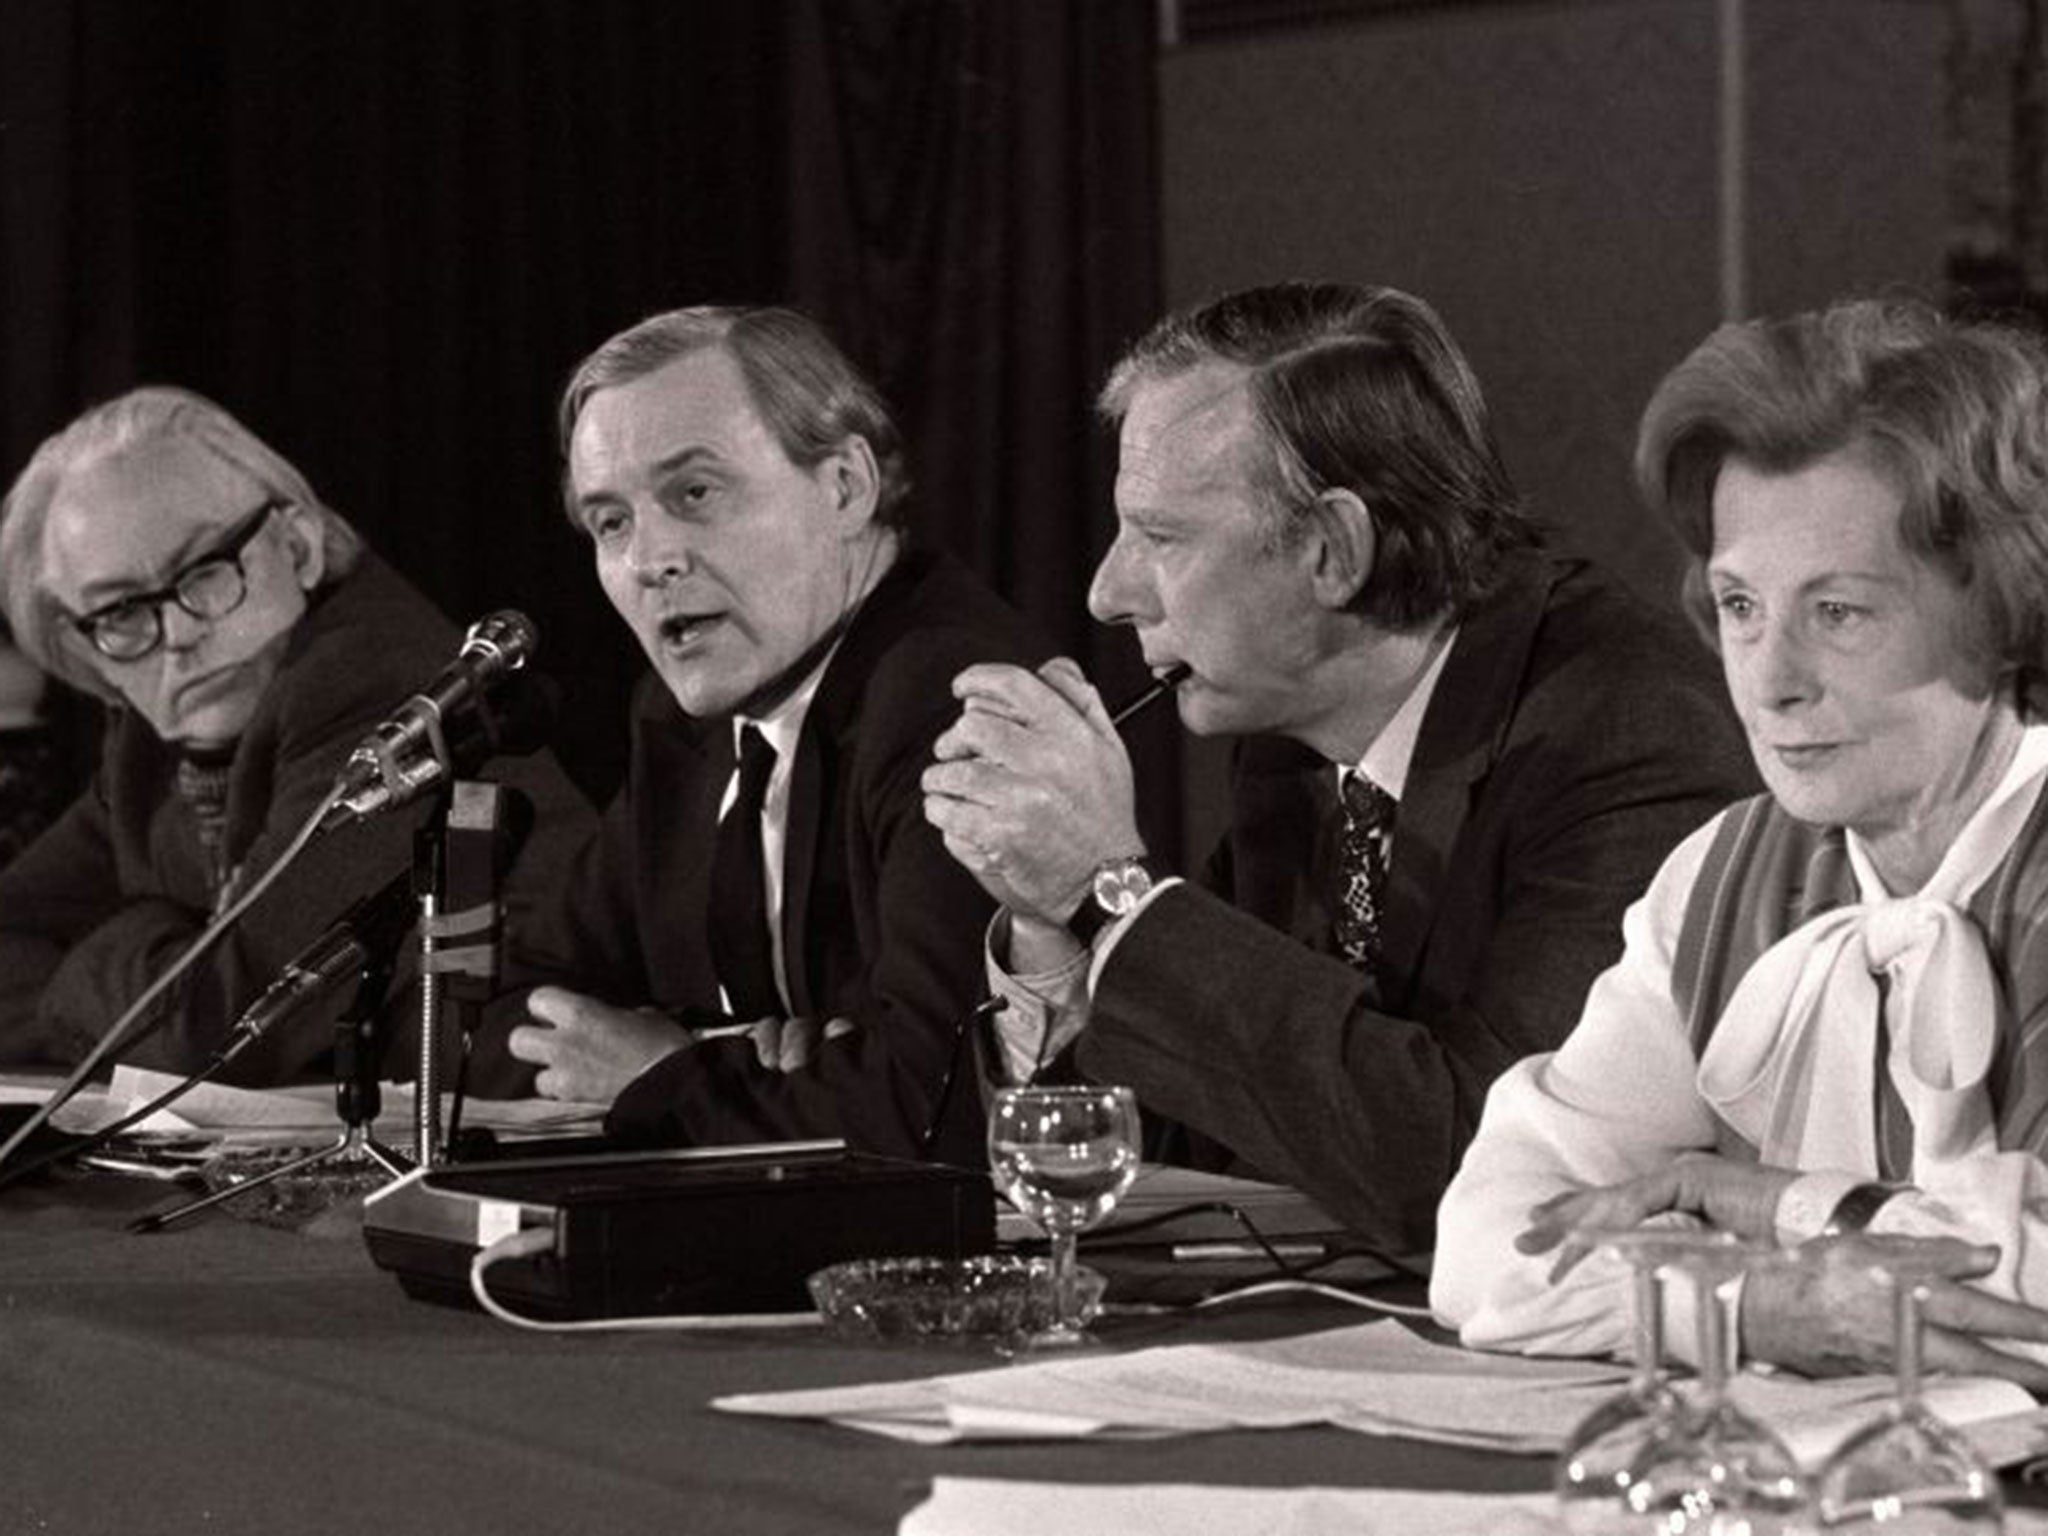 Tony Benn speaking alongside other anti-Common Market Ministers Michael Foot, Peter Shore and Barbara Castle in 1975